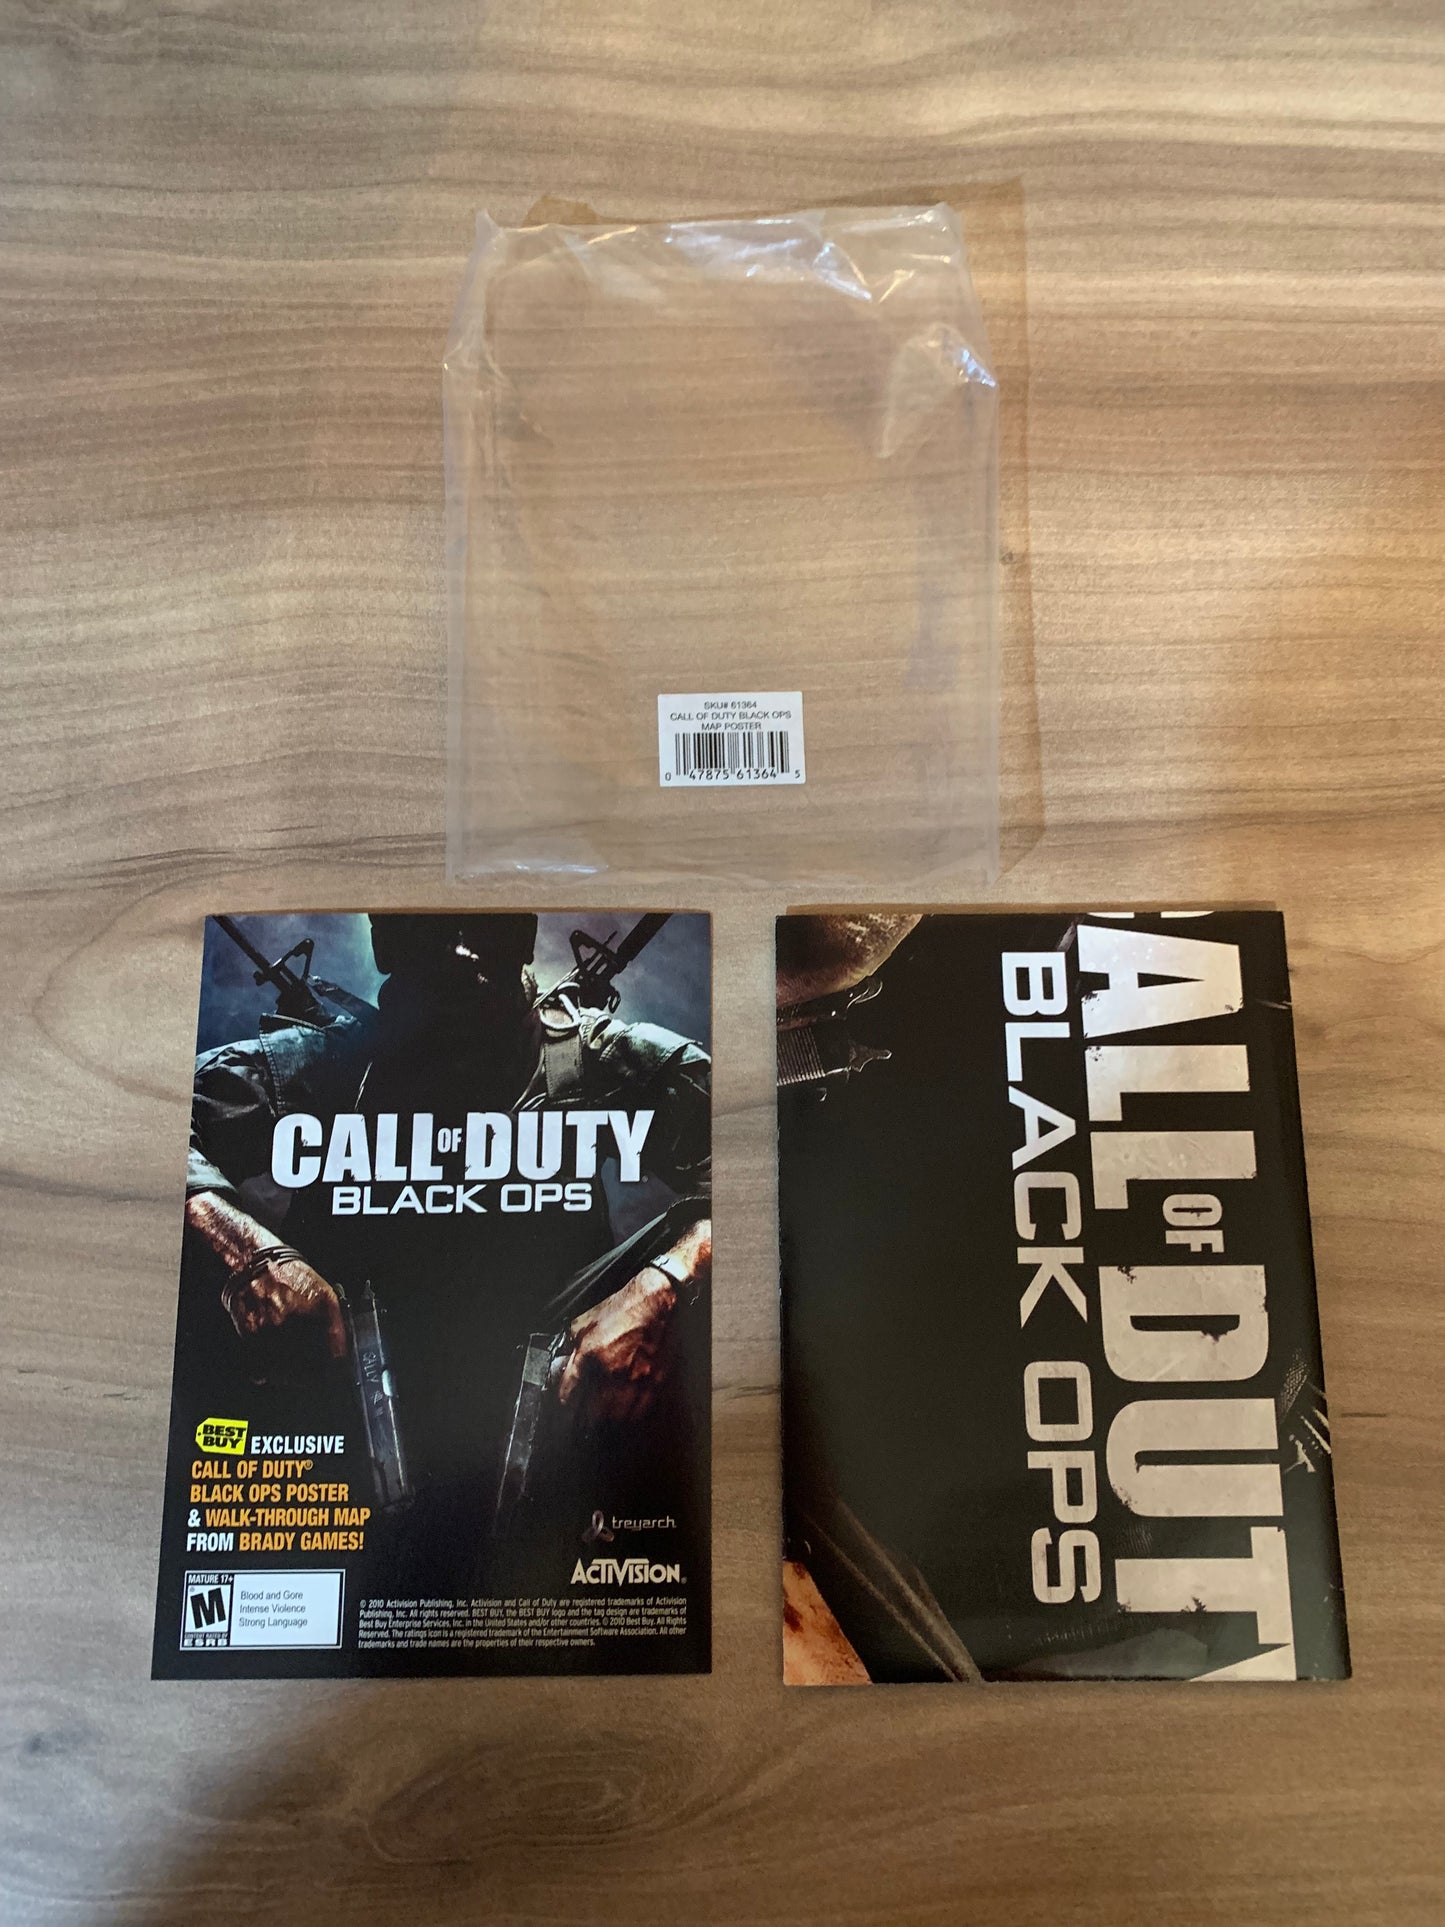 SONY PLAYSTATiON 3 [PS3] | CALL OF DUTY BLACK OPS | PRESTiGE EDiTiON